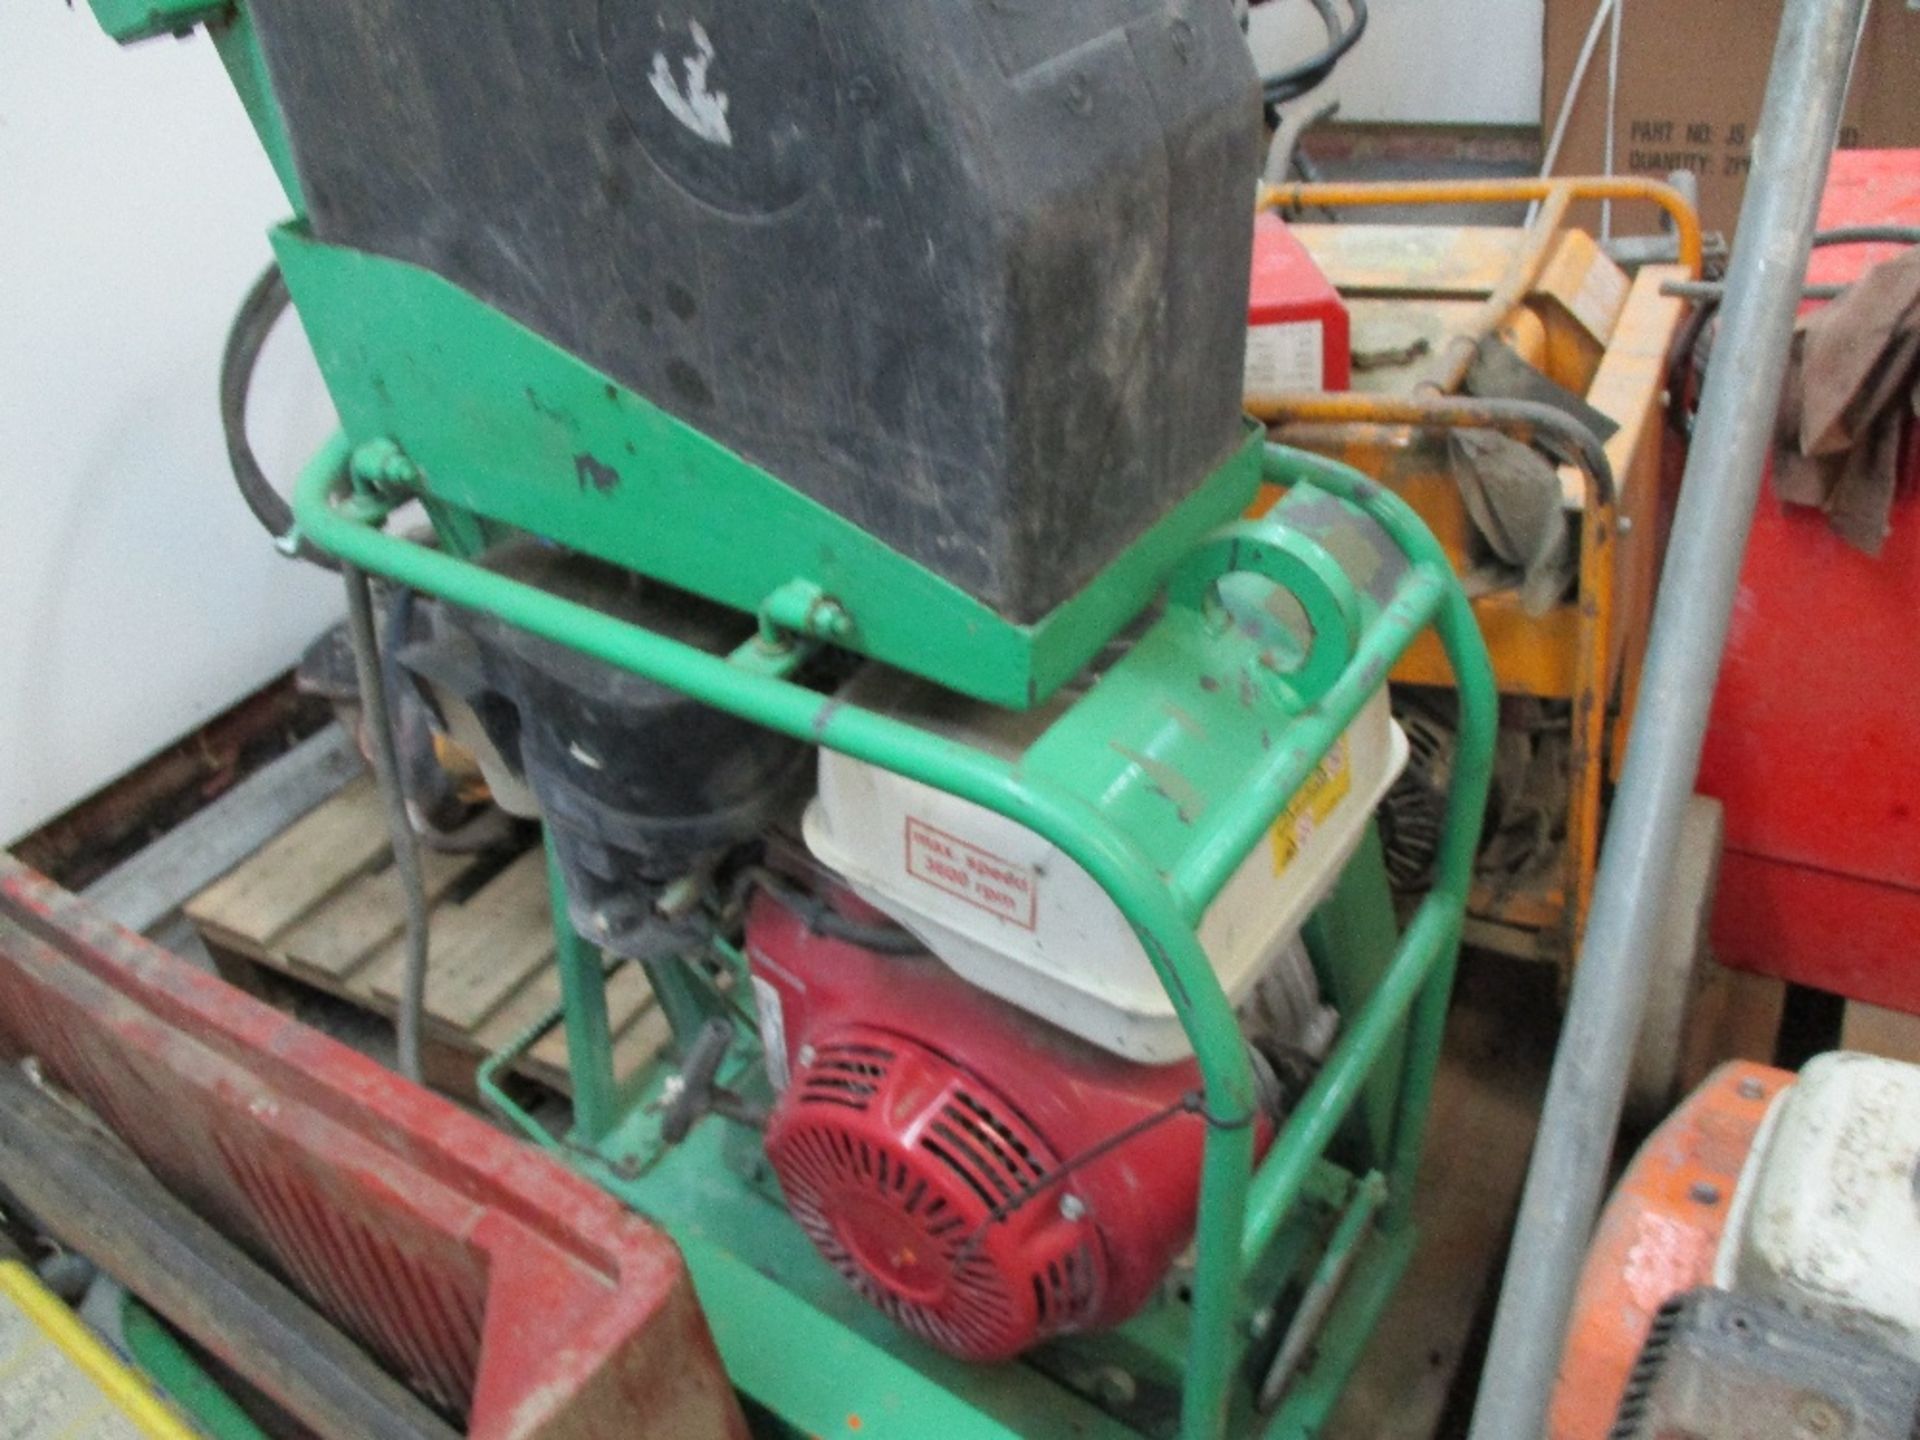 3 X BELLE PETROL ENGINED FLOOR SAWS...SOLD AS ONE LOT - Image 8 of 10